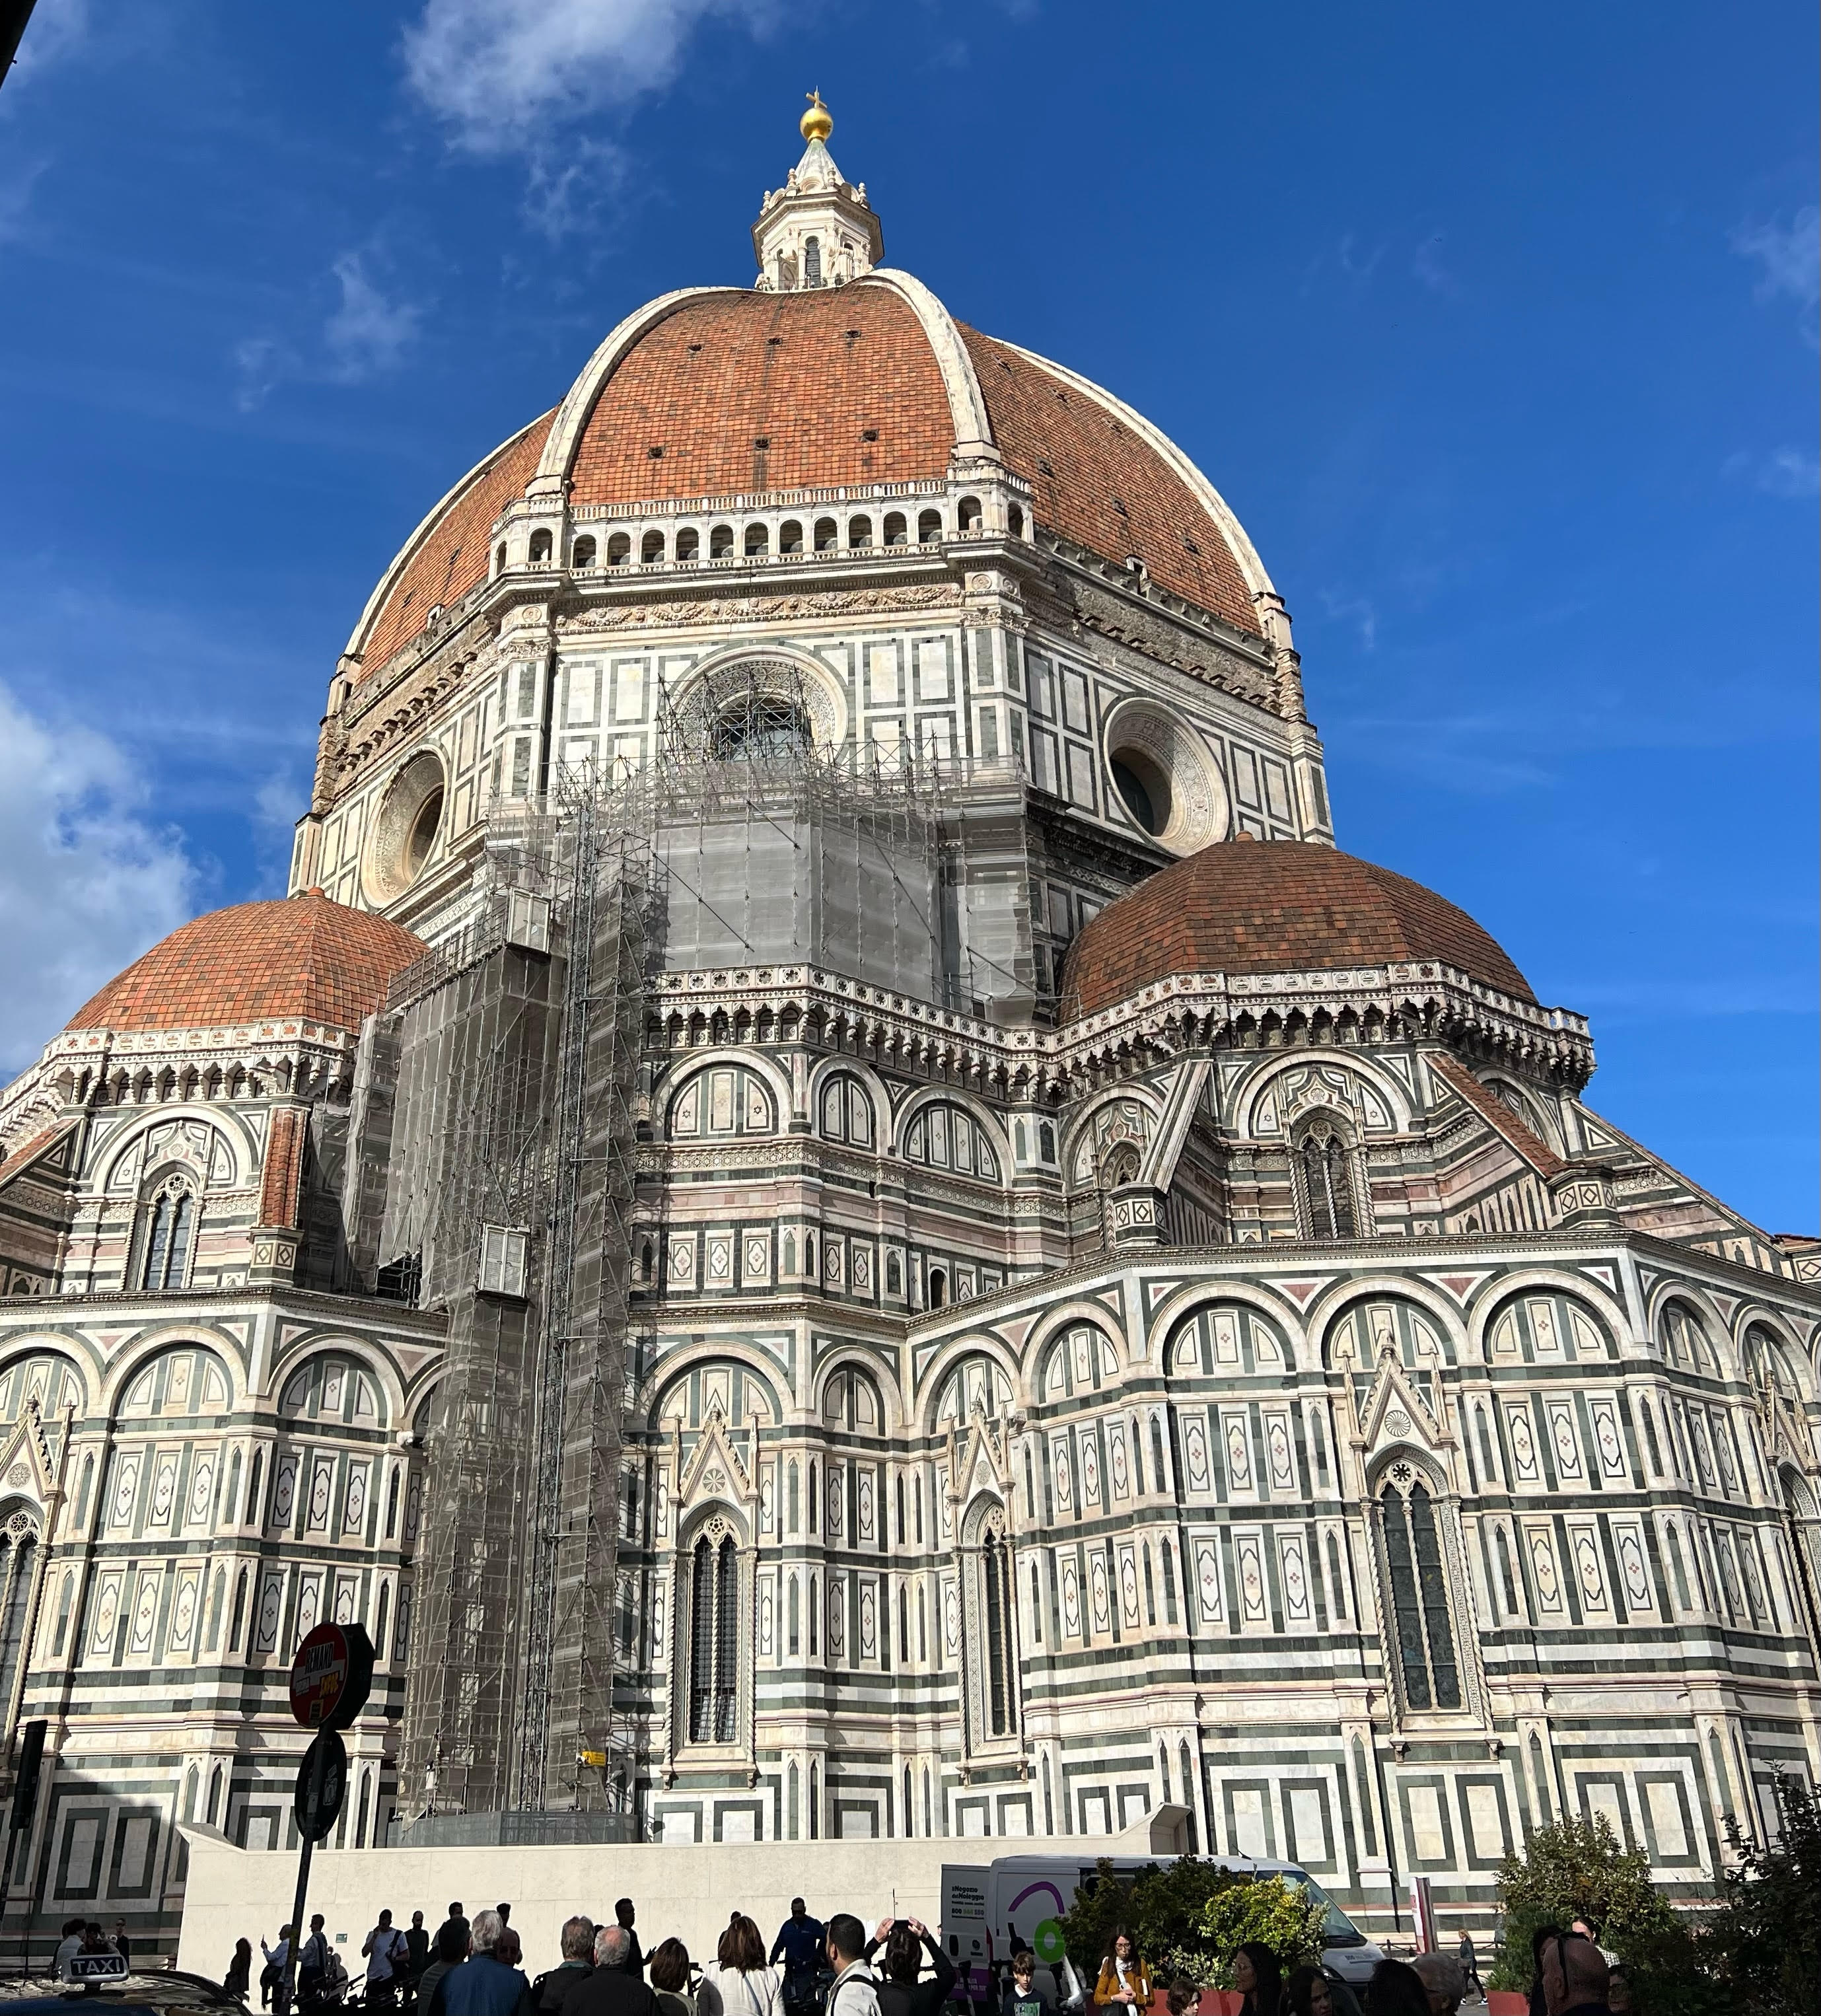 A detailed view of the Florence Cathedral, also known as the Duomo, in Florence, Italy. The magnificent red-tiled dome and intricate marble facade, featuring green, white, and pink panels, stand out under a clear blue sky. Scaffolding is visible on part of the structure, indicating ongoing restoration work, while visitors gather around the base, admiring the historic architecture.